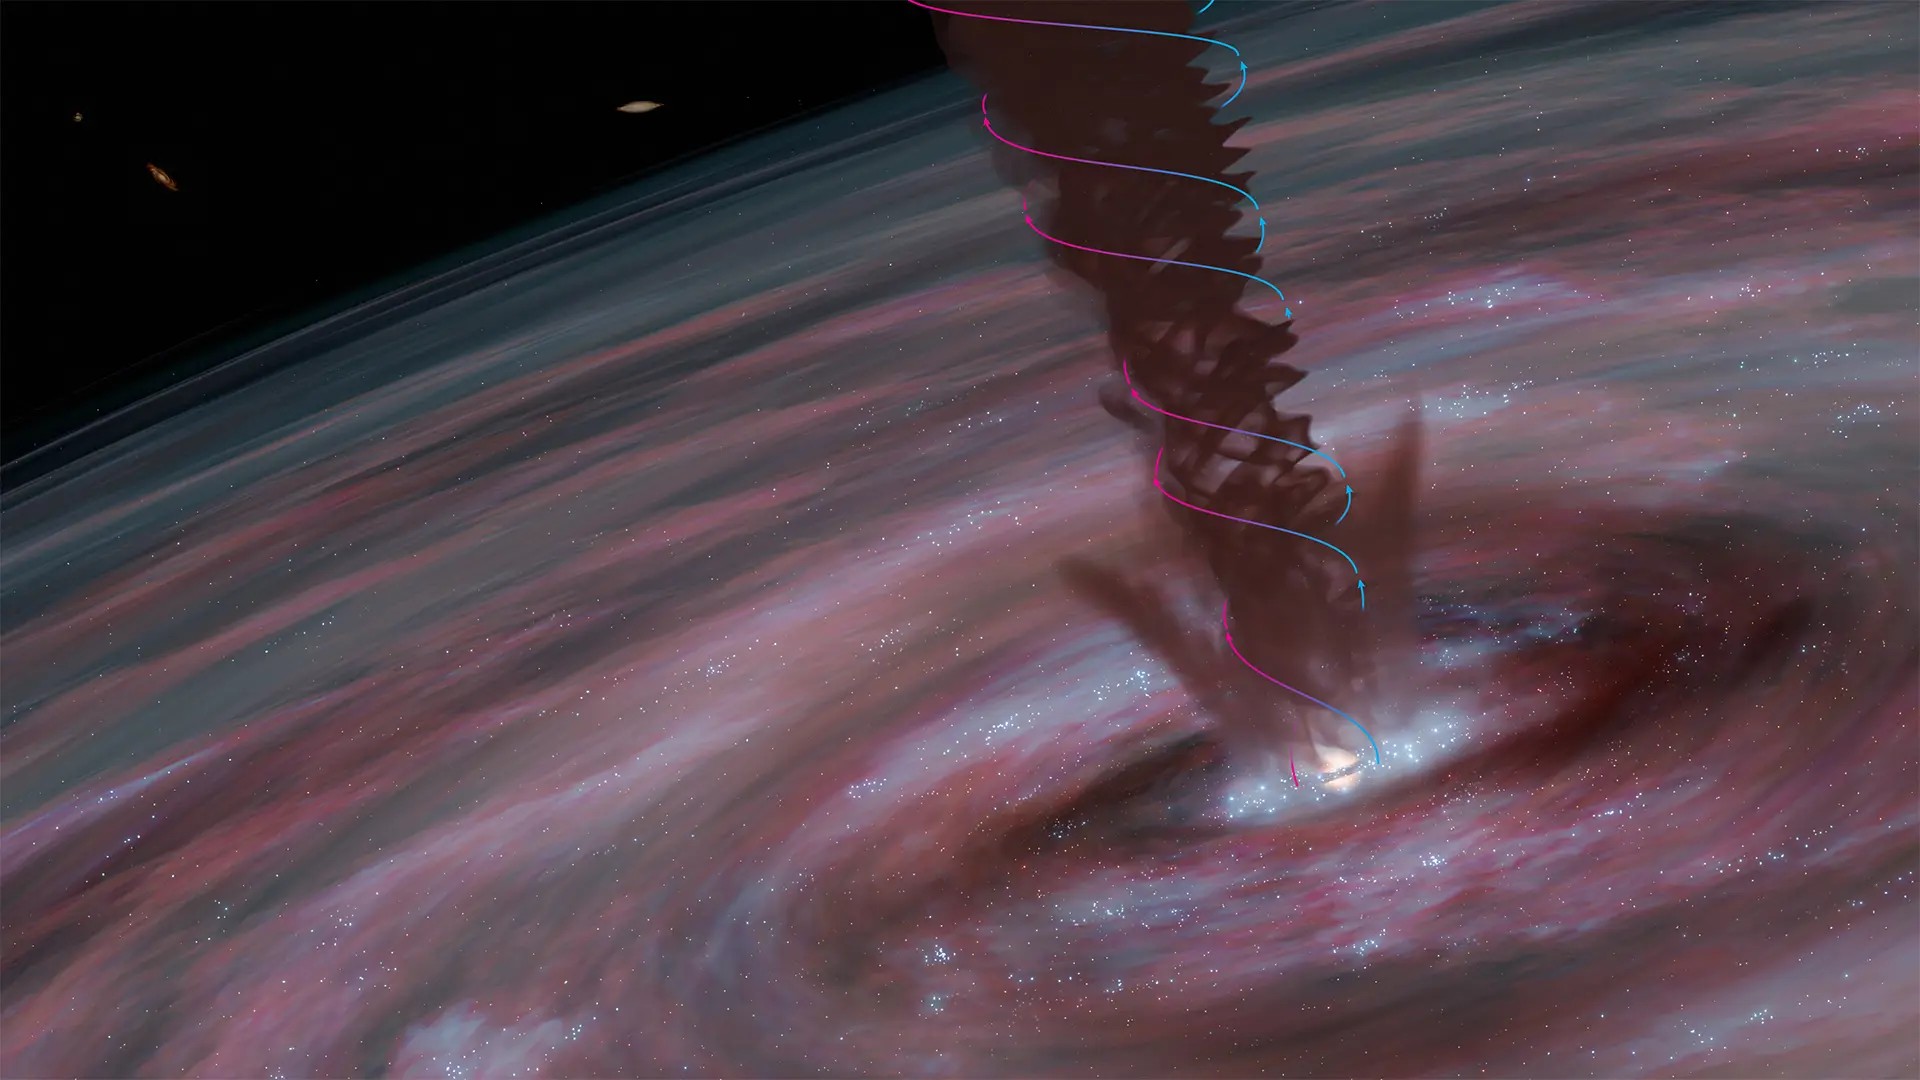 Galactic whirlwind, with arrows